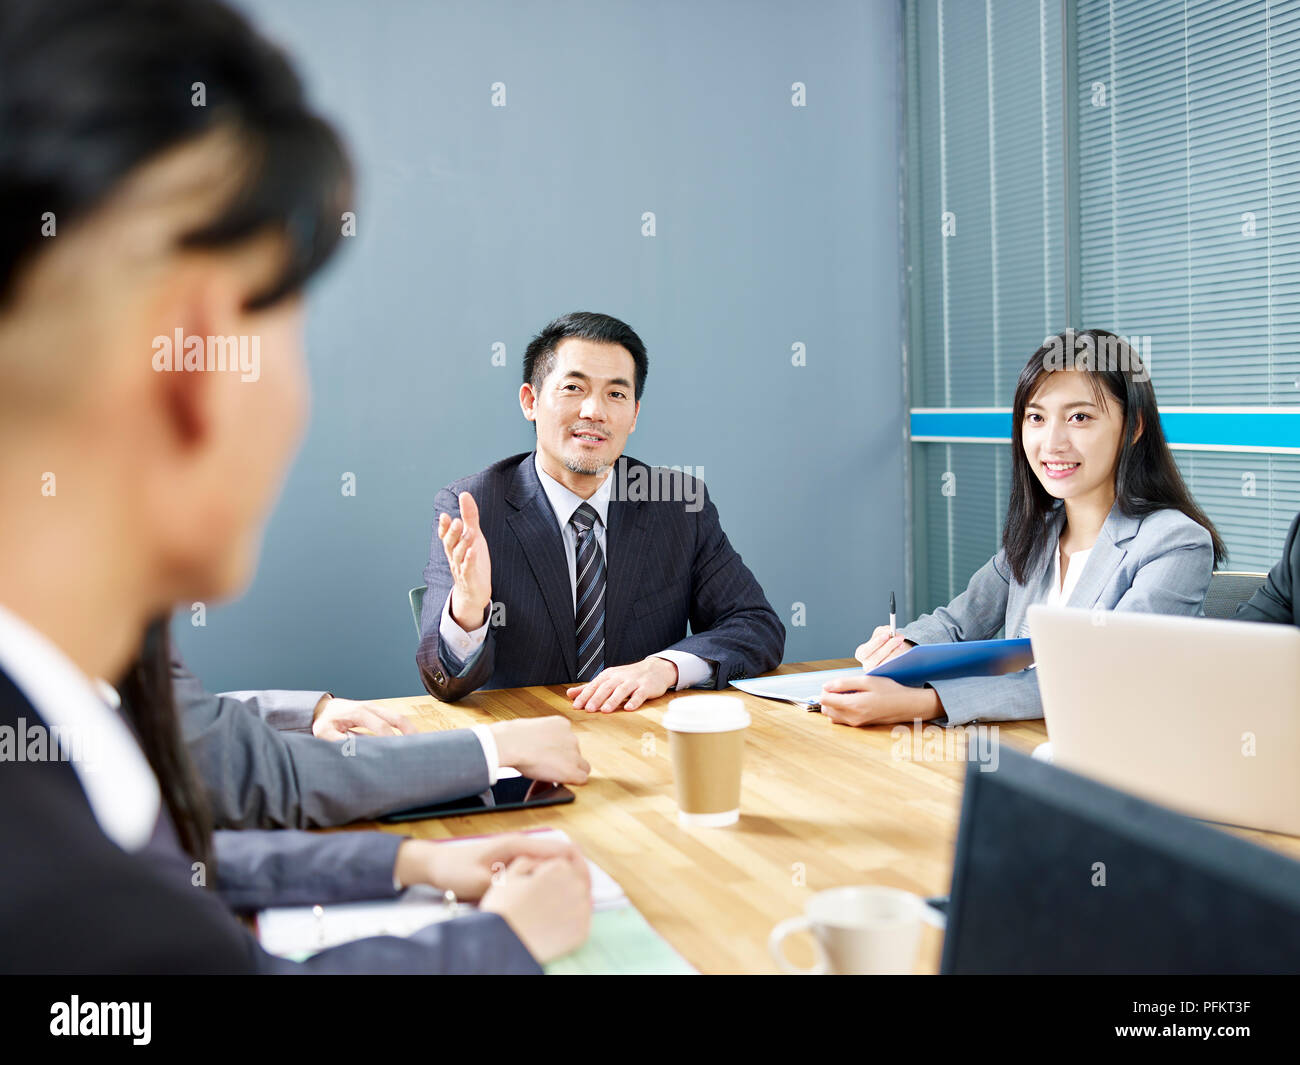 asian corporate business people talking during discussion meeting in office. Stock Photo